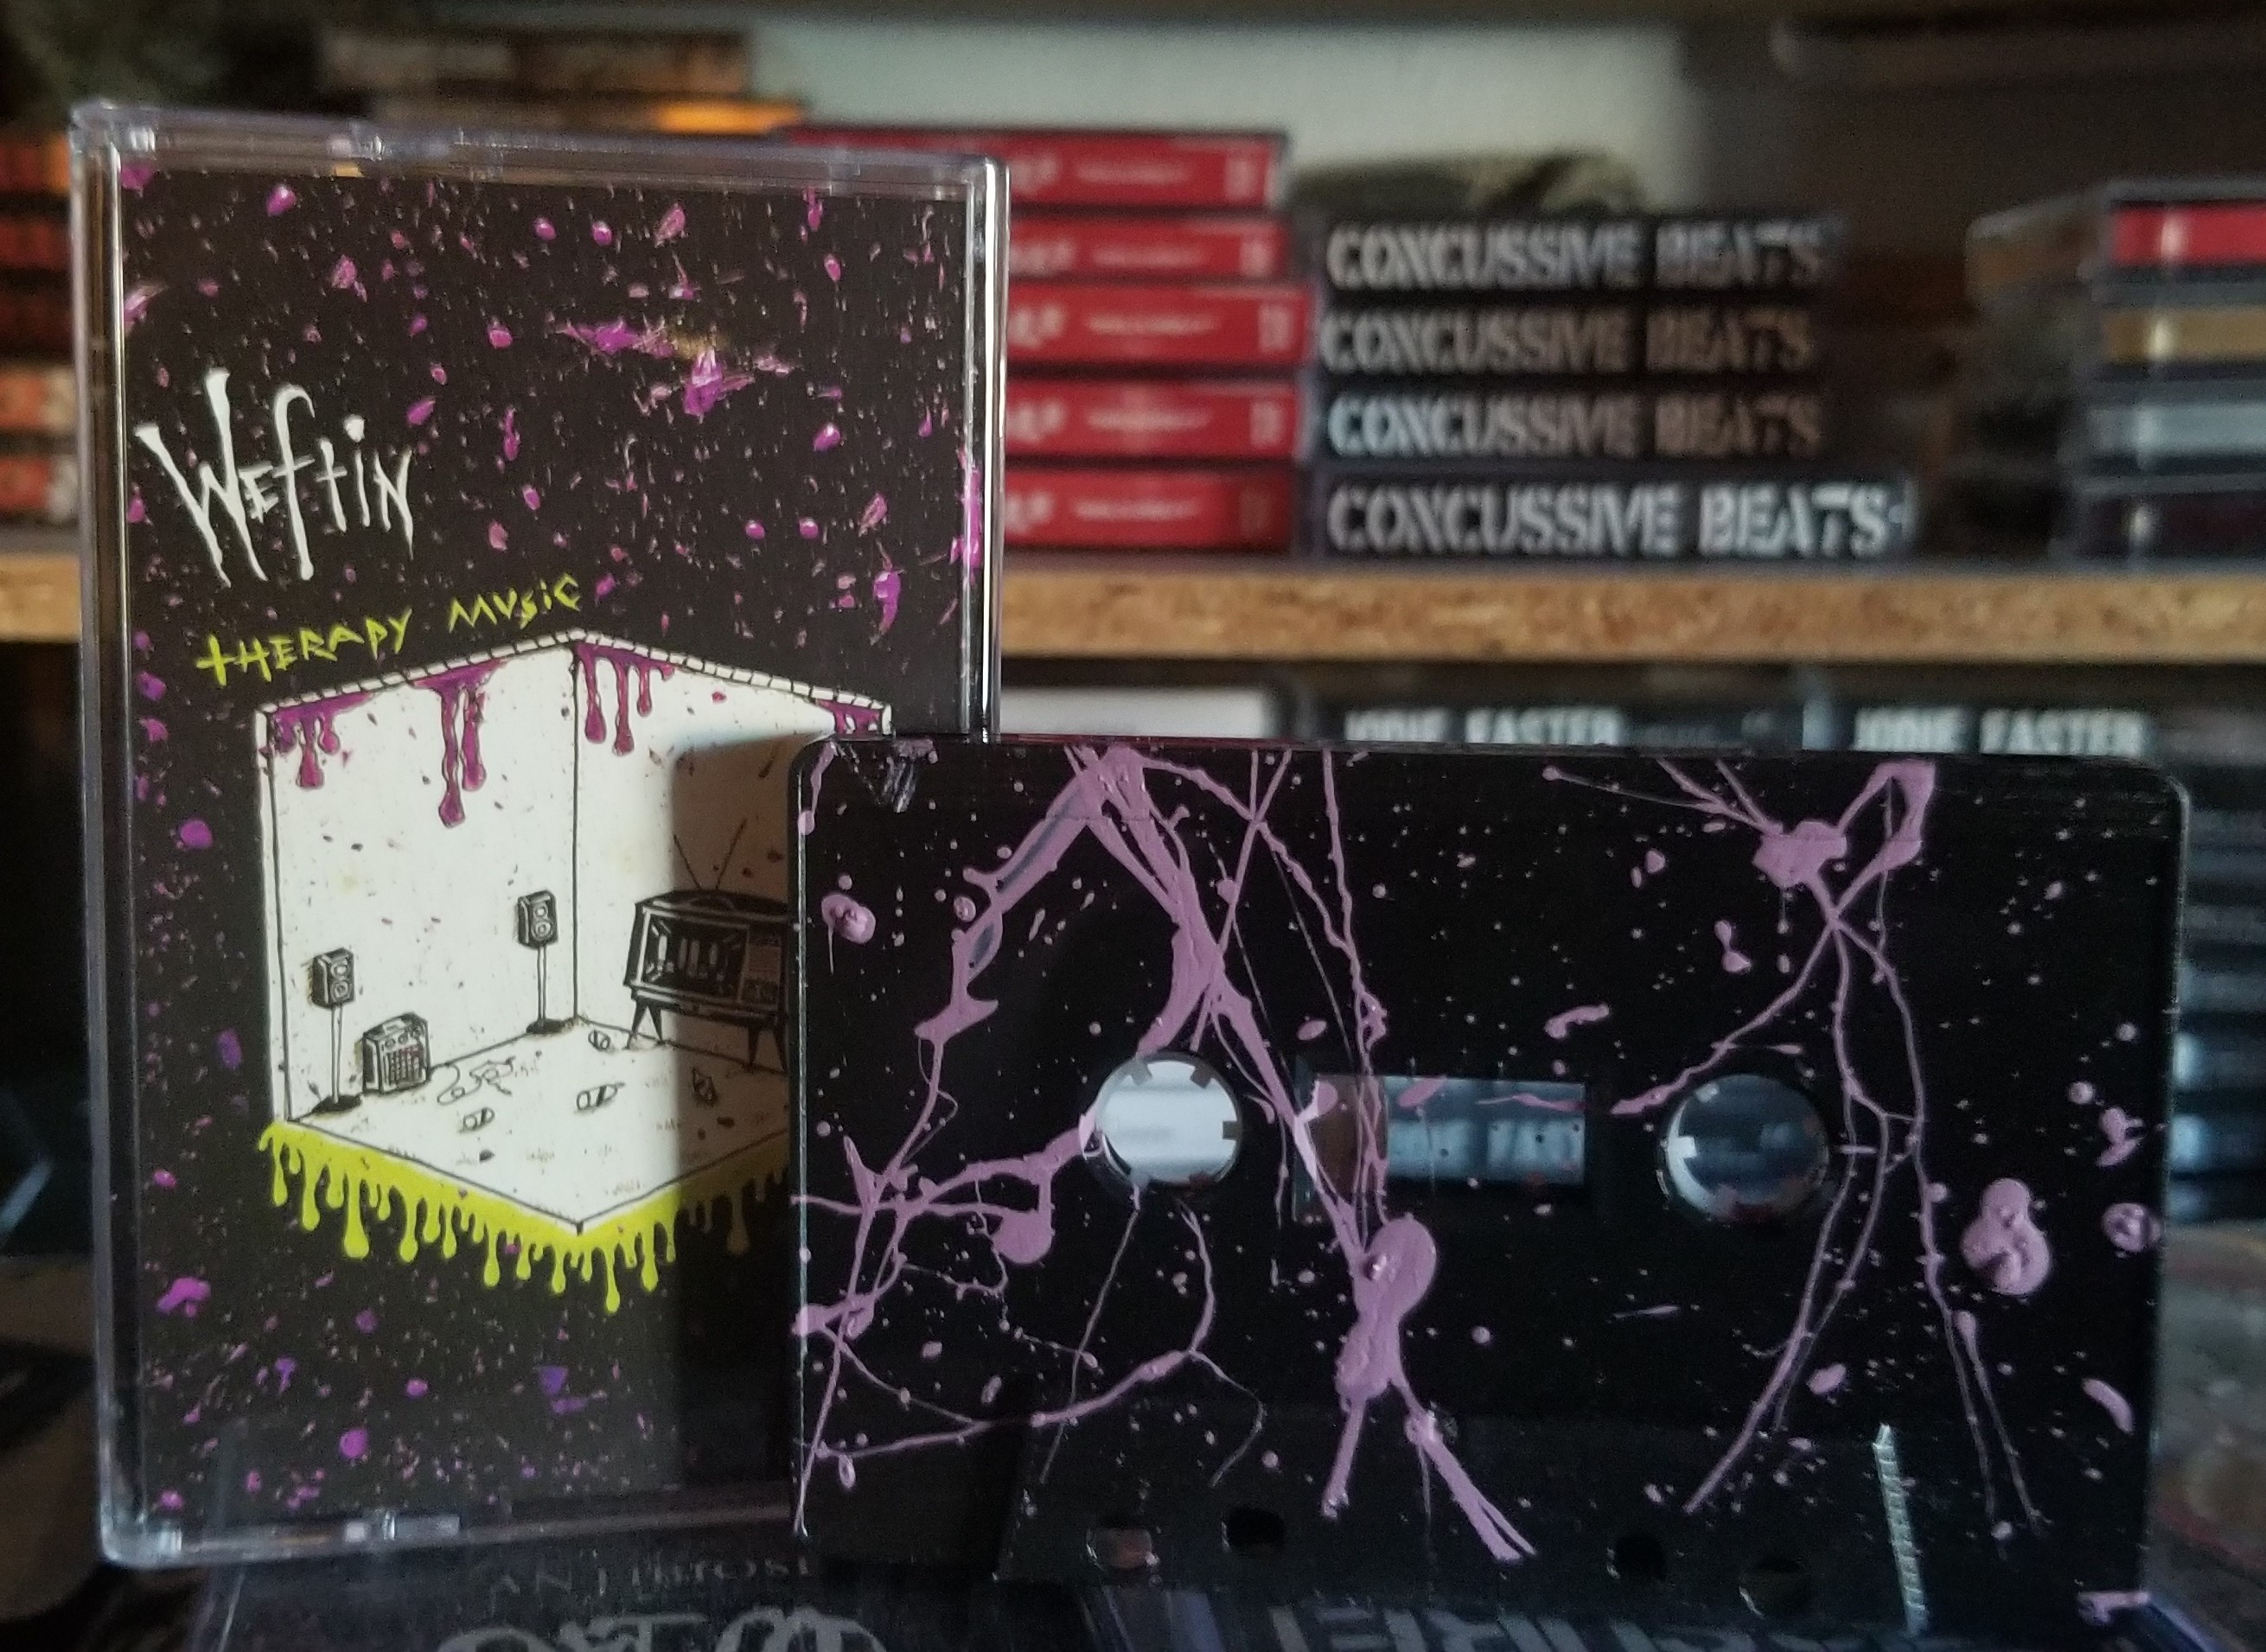 Weftin - Therapy Music Cassette